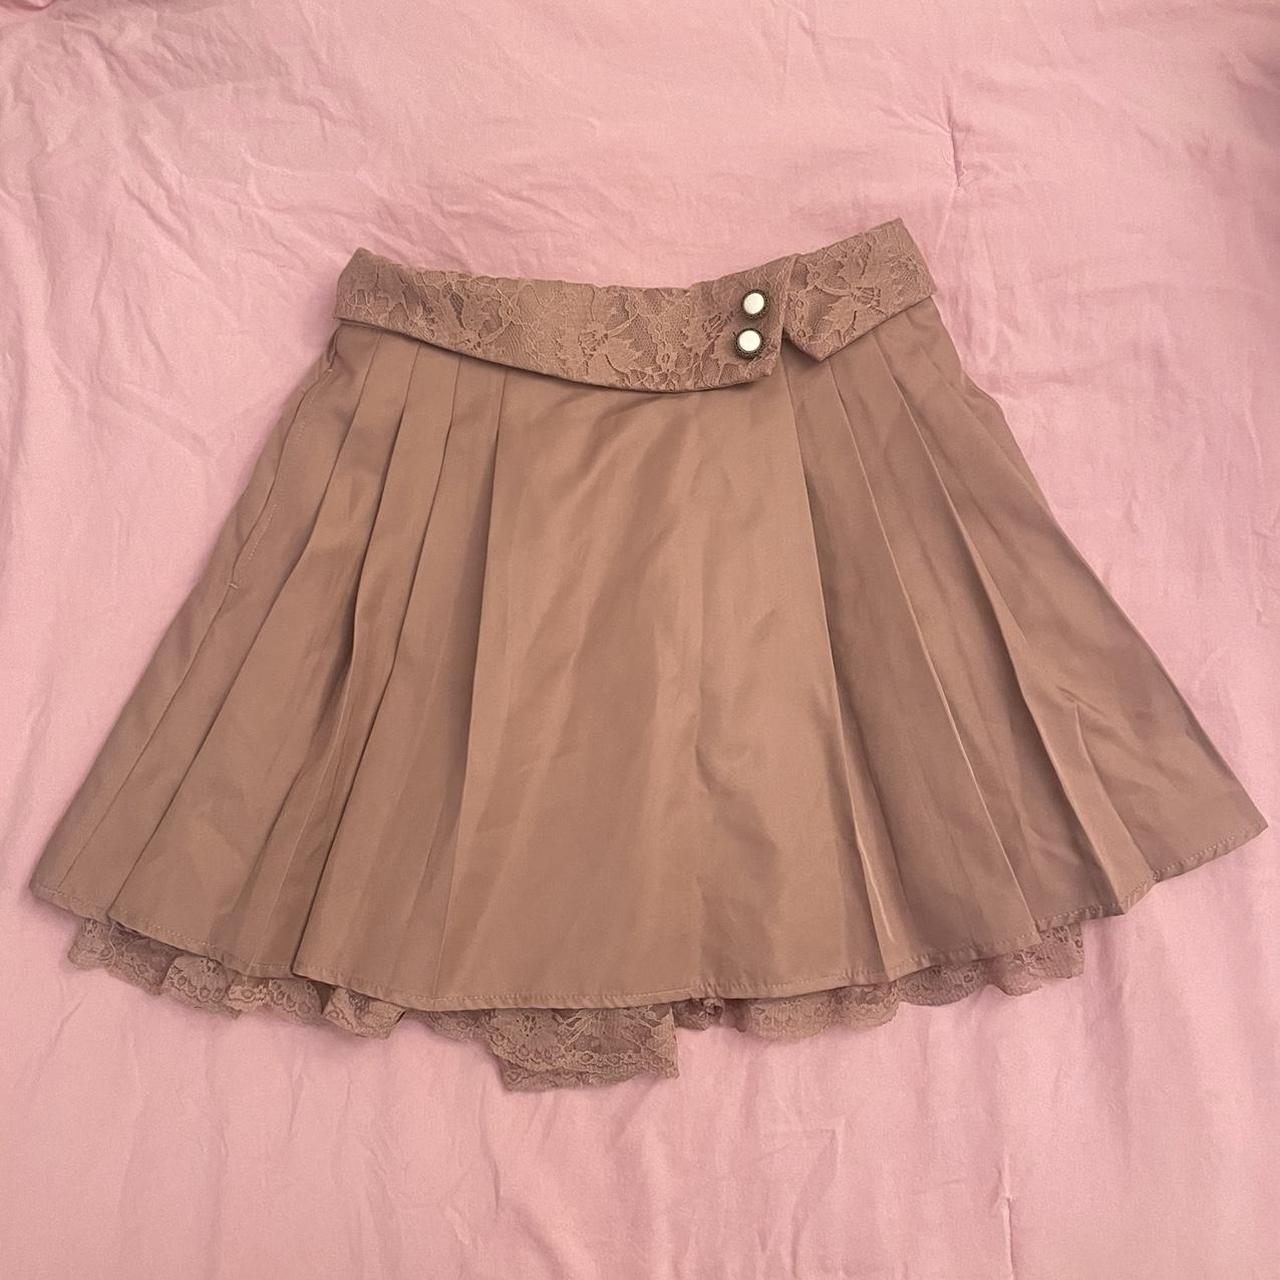 Axes femme skirt/shorts. They look like skirt but